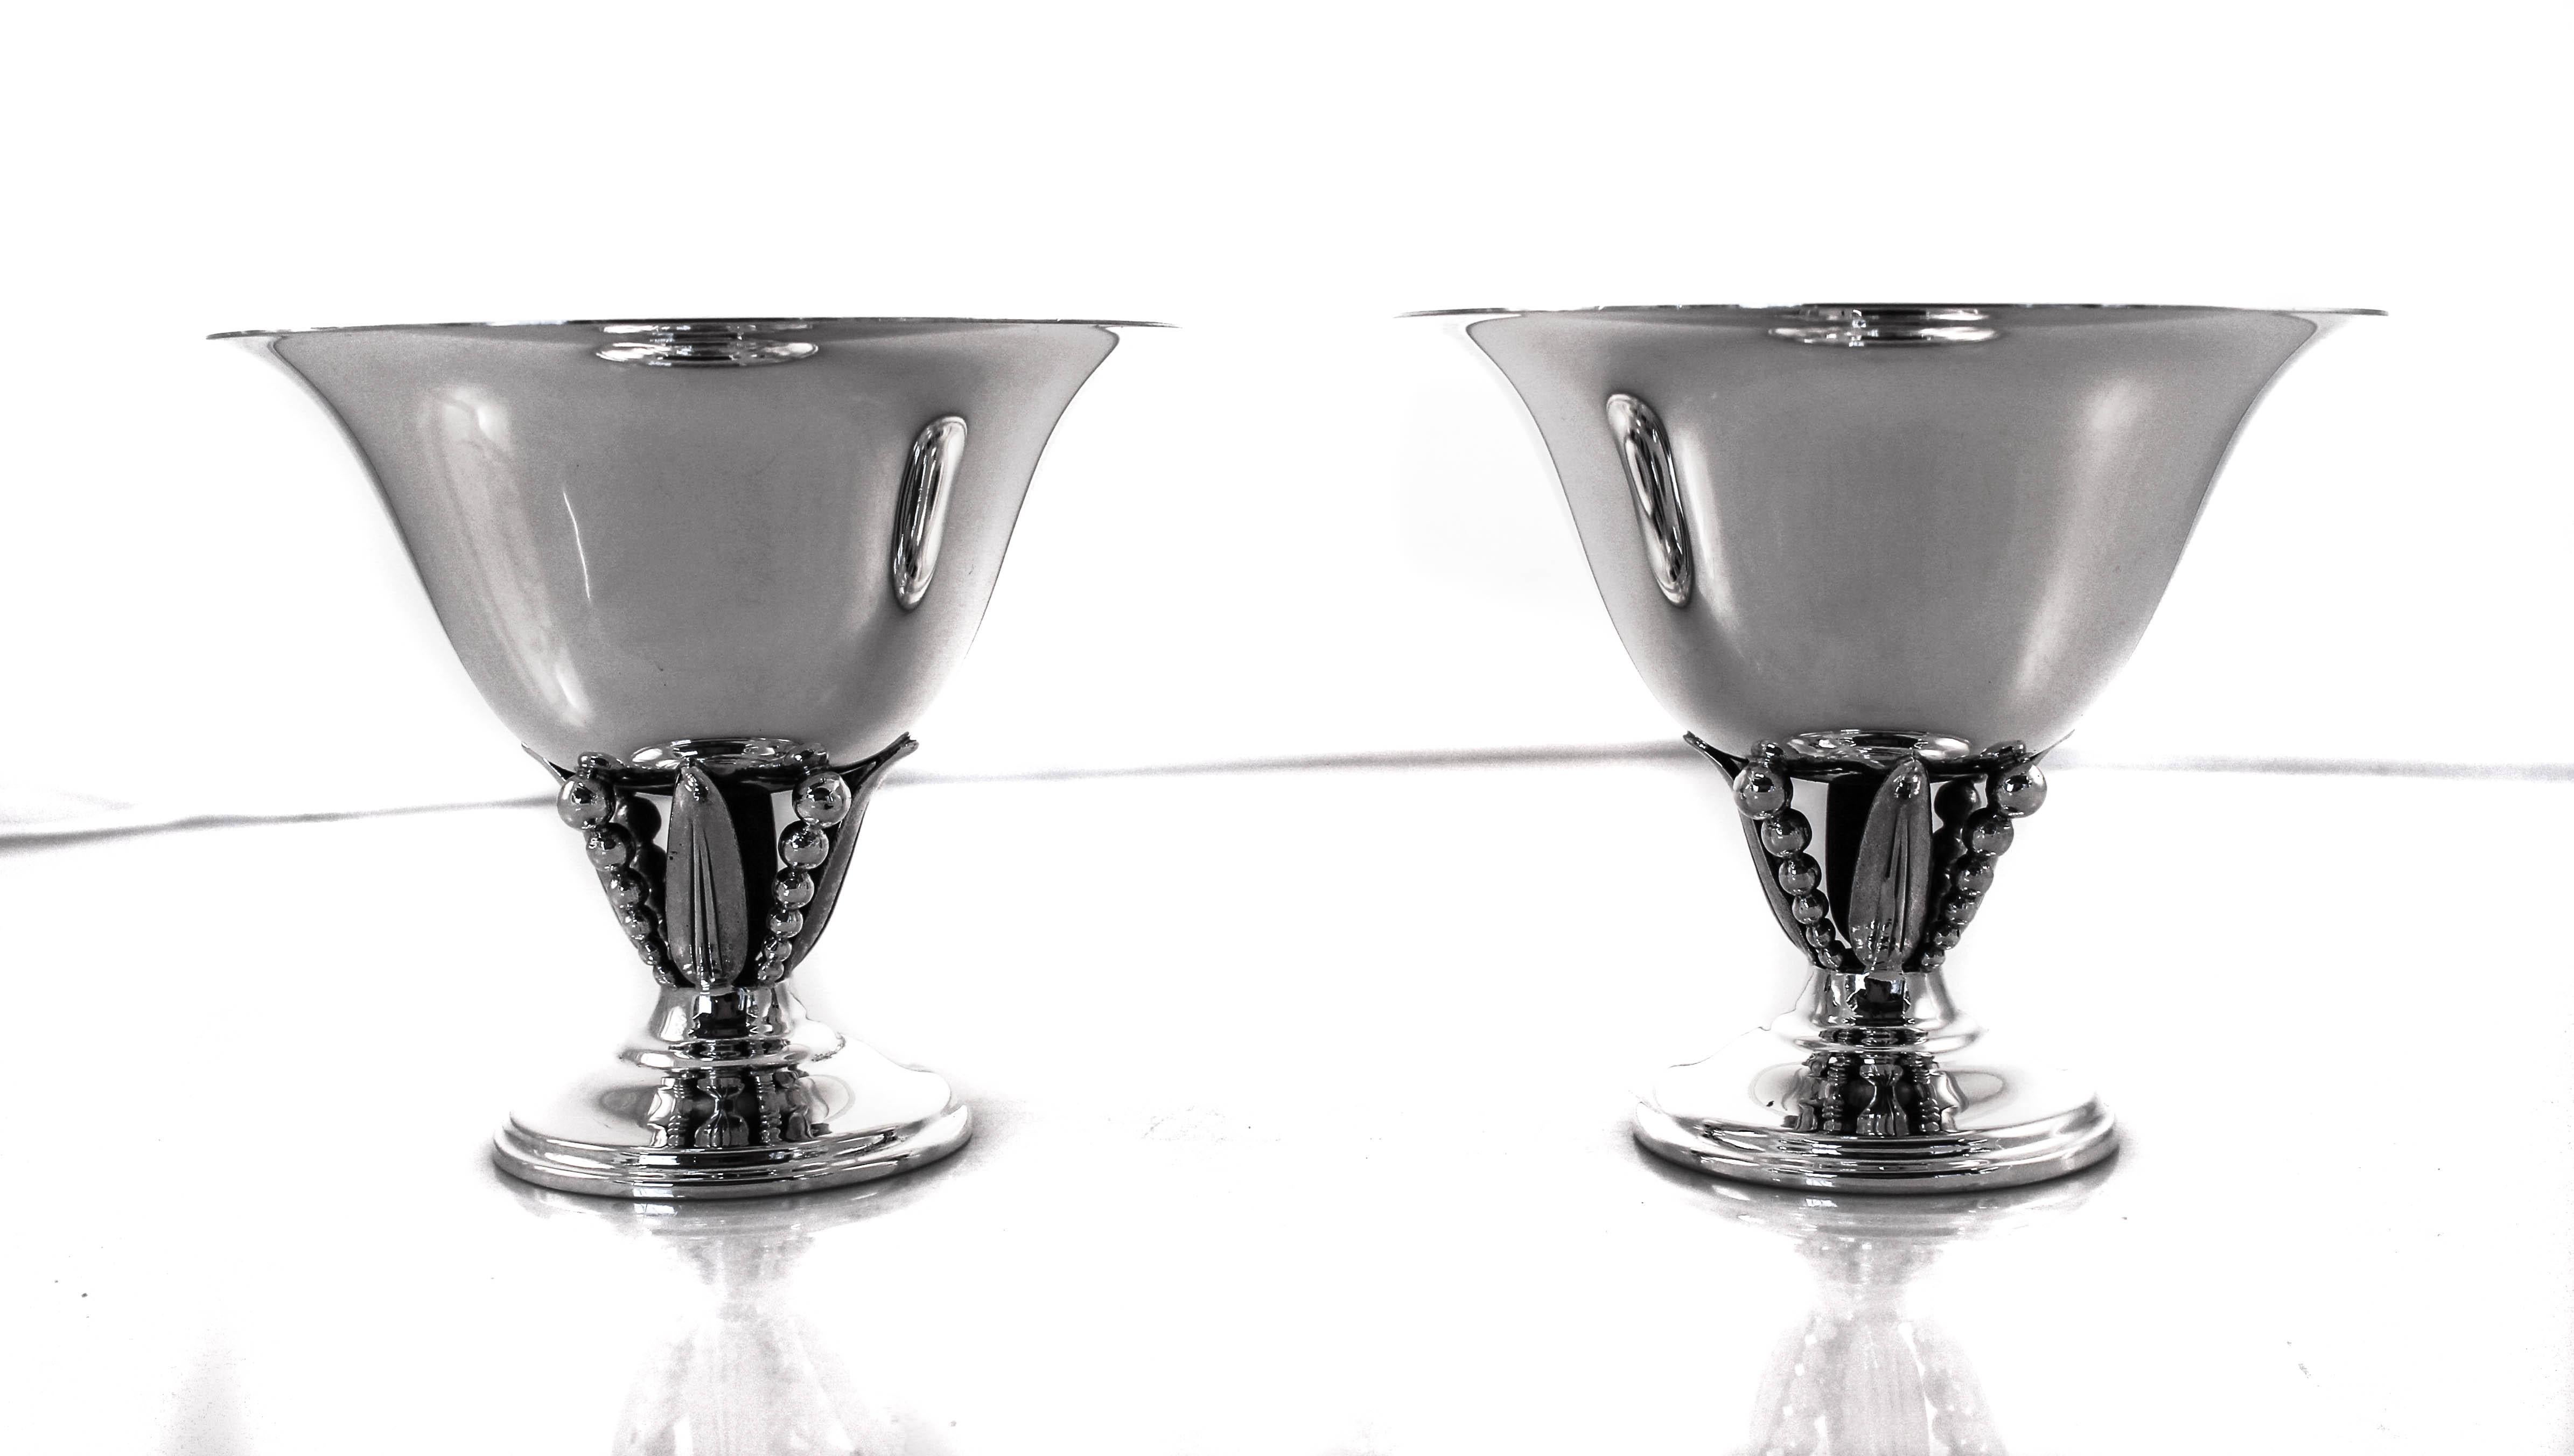 This pair of sterling silver compotes have a Jensen-esque quality and look. The reason is that many of the silversmiths that worked at International Silver later went in to work for Georg Jensen Silver. The simple design and the beading above the